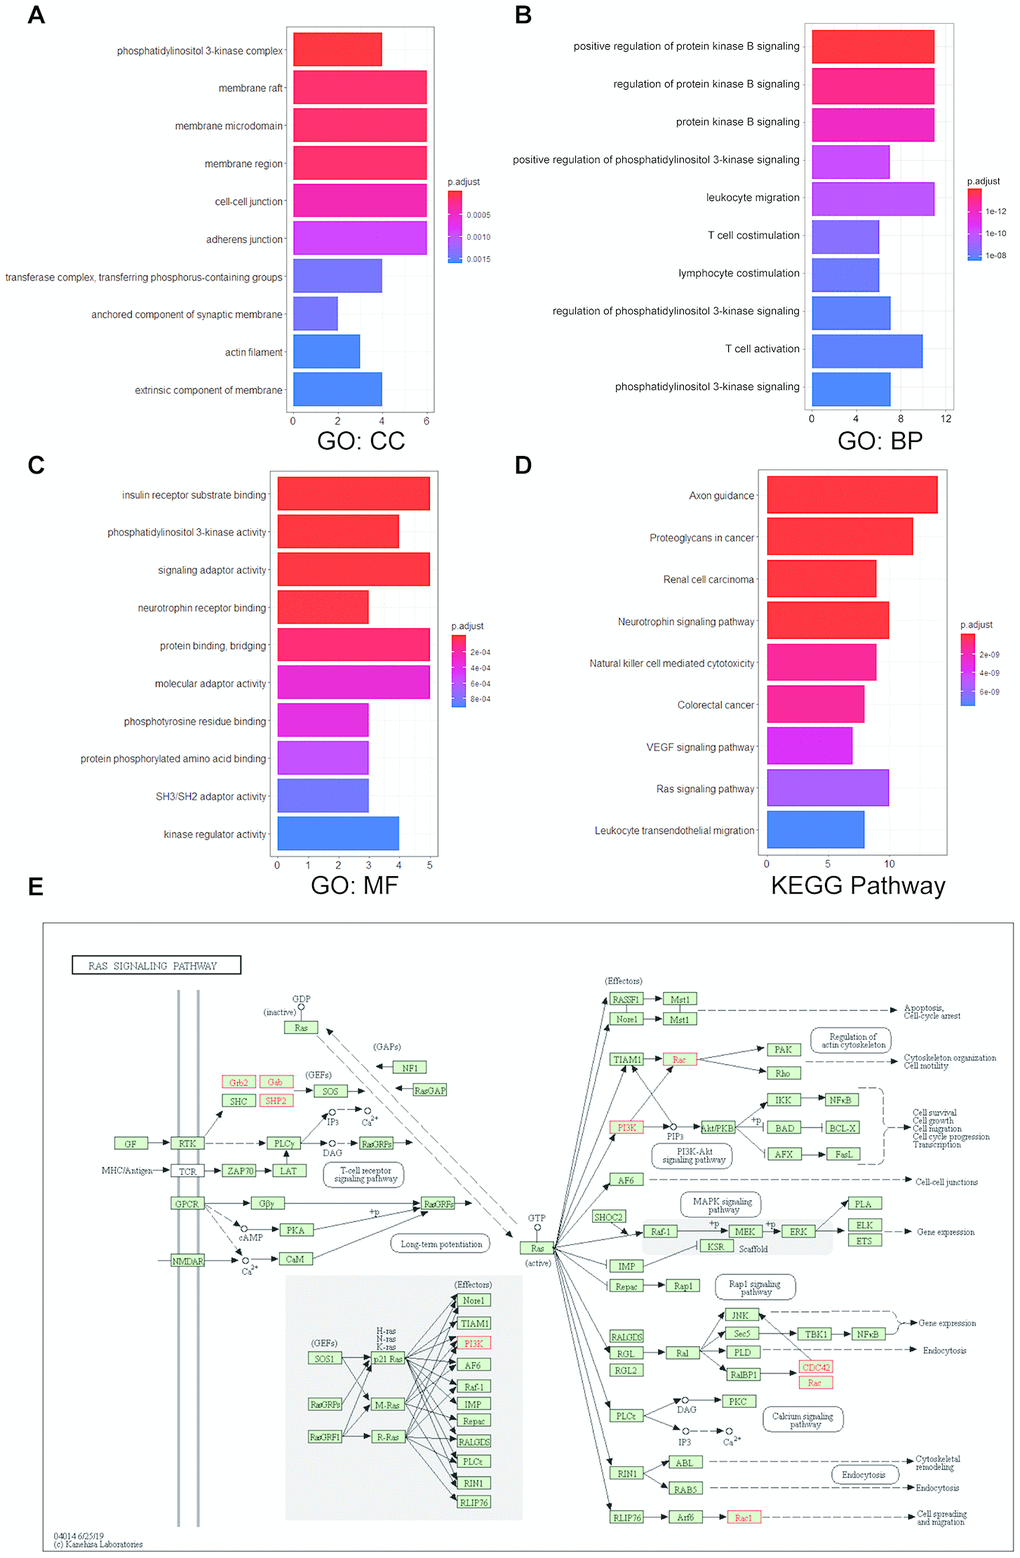 Enrichment analysis of UNC5B and its neighboring altered genes in breast cancer. The functions of UNC5B and the 20 most frequently altered UNC5B-neighboring genes were predicted in Gene Ontology (GO) and Kyoto Encyclopedia of Genes and Genomes (KEGG) pathway enrichment analyses using the “clusterProfiler” package in R. (A) Cellular components. (B) Biological processes. (C) Molecular functions. (D) KEGG pathway enrichment analysis. (E) Detailed annotation of the Ras signaling pathway regulated by UNC5B-associated gene alterations. Nodes marked in red represent altered genes.